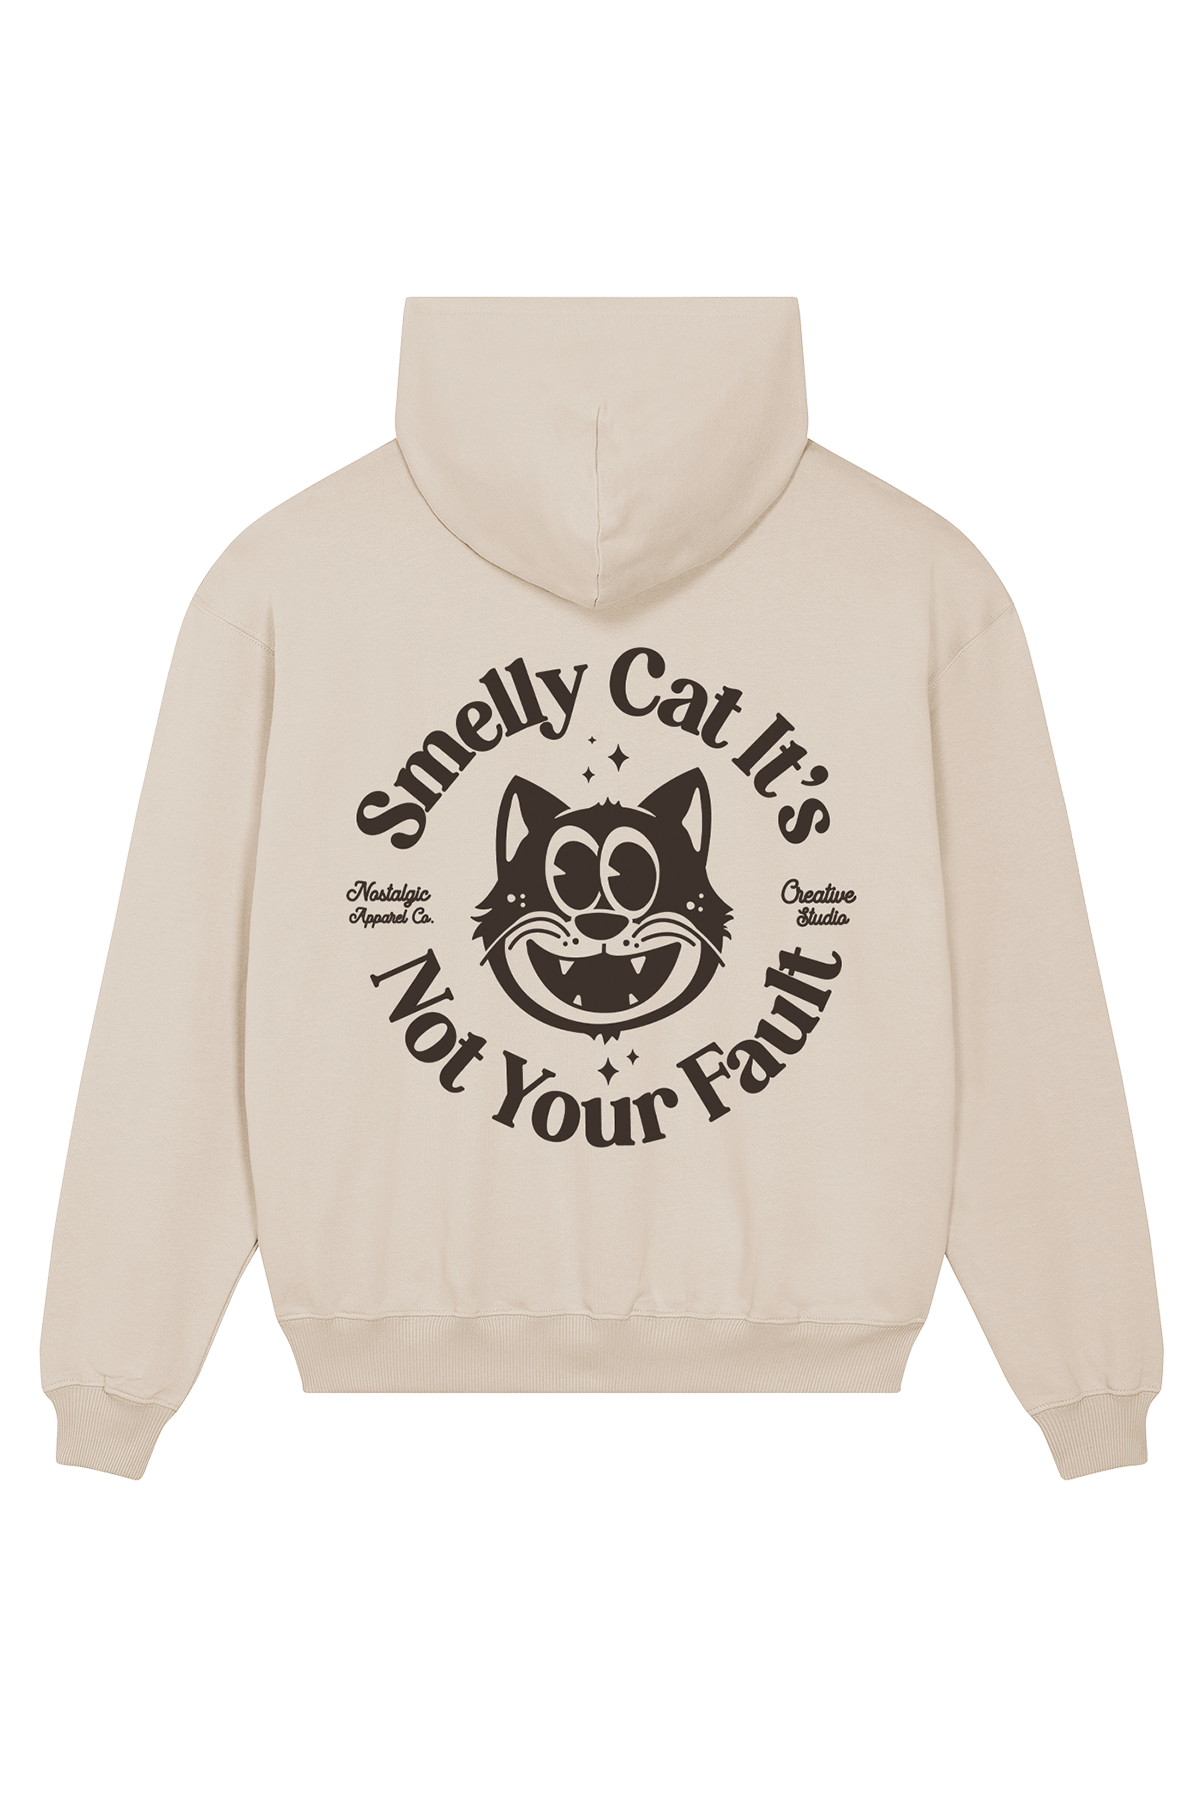 Smelly Cat | Oversized Hoodie